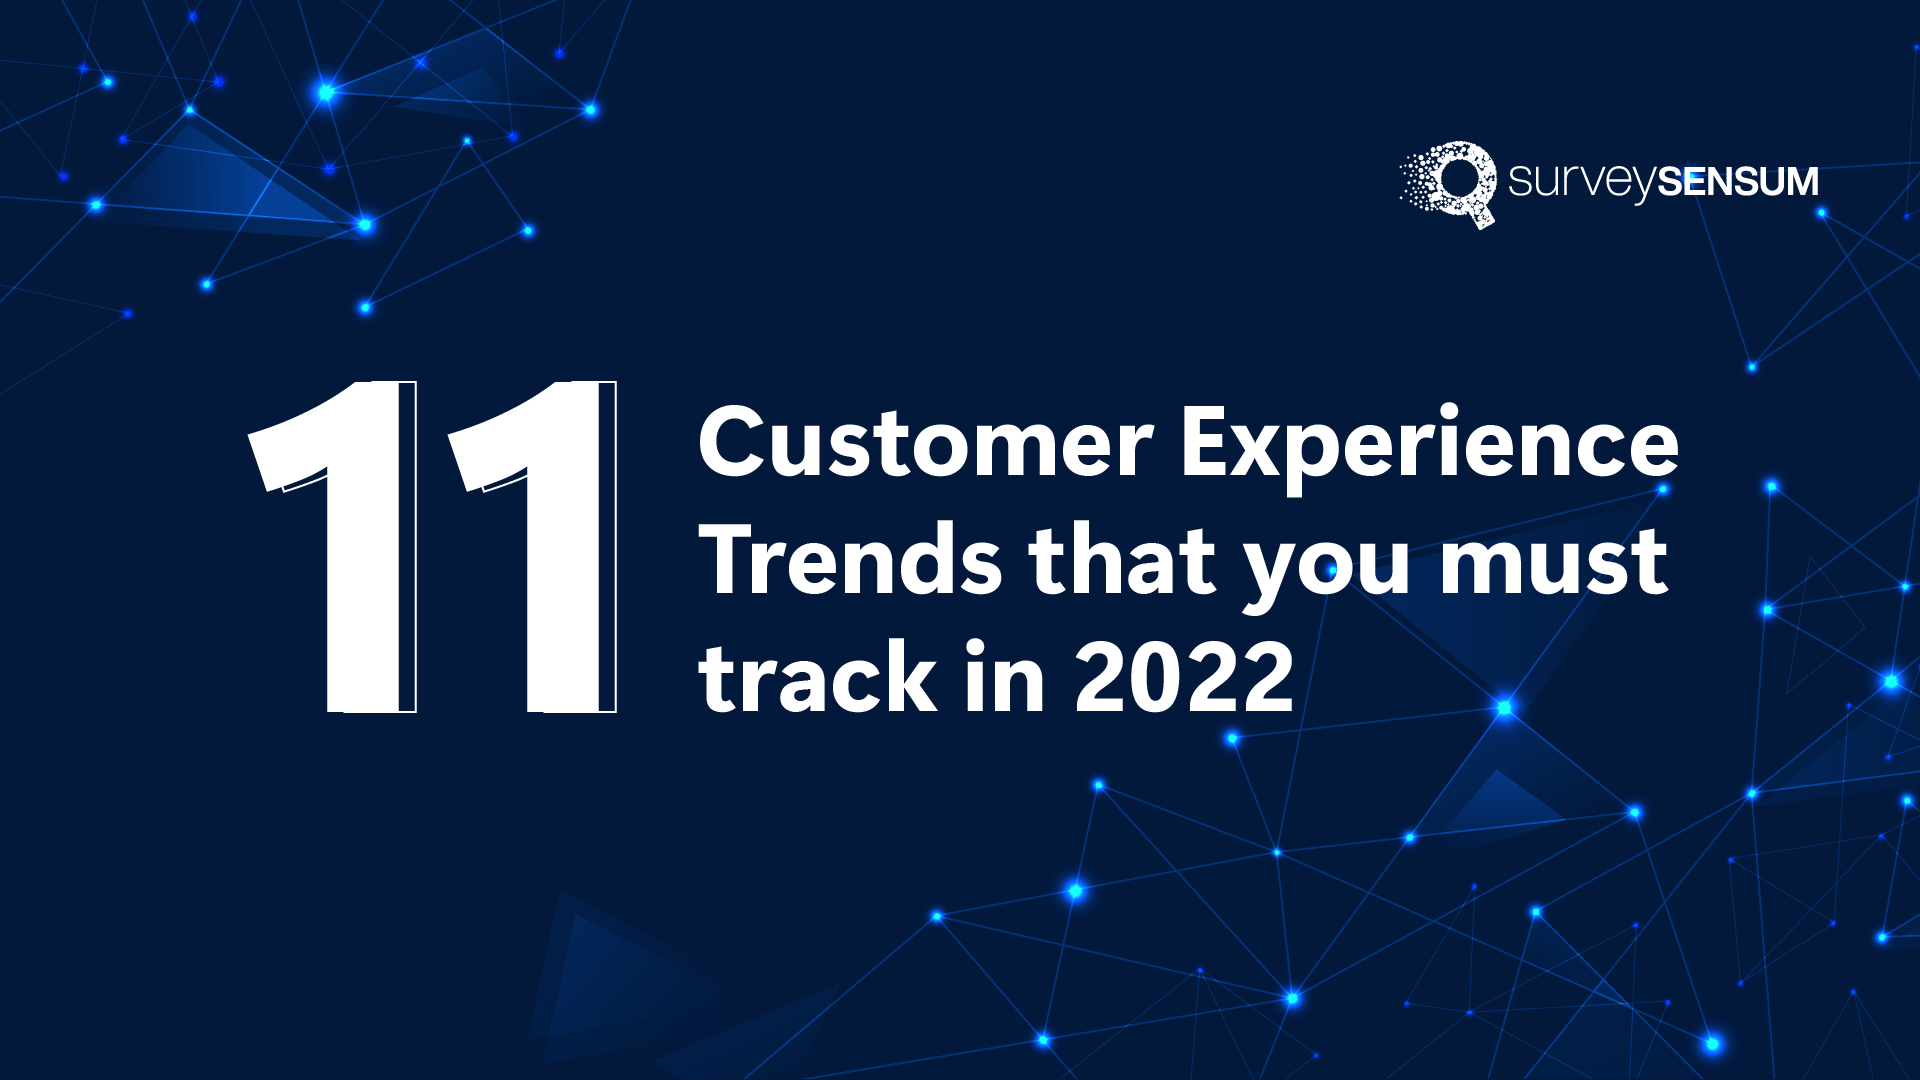 11 Customer Experience Trends That You Must Track in 2022